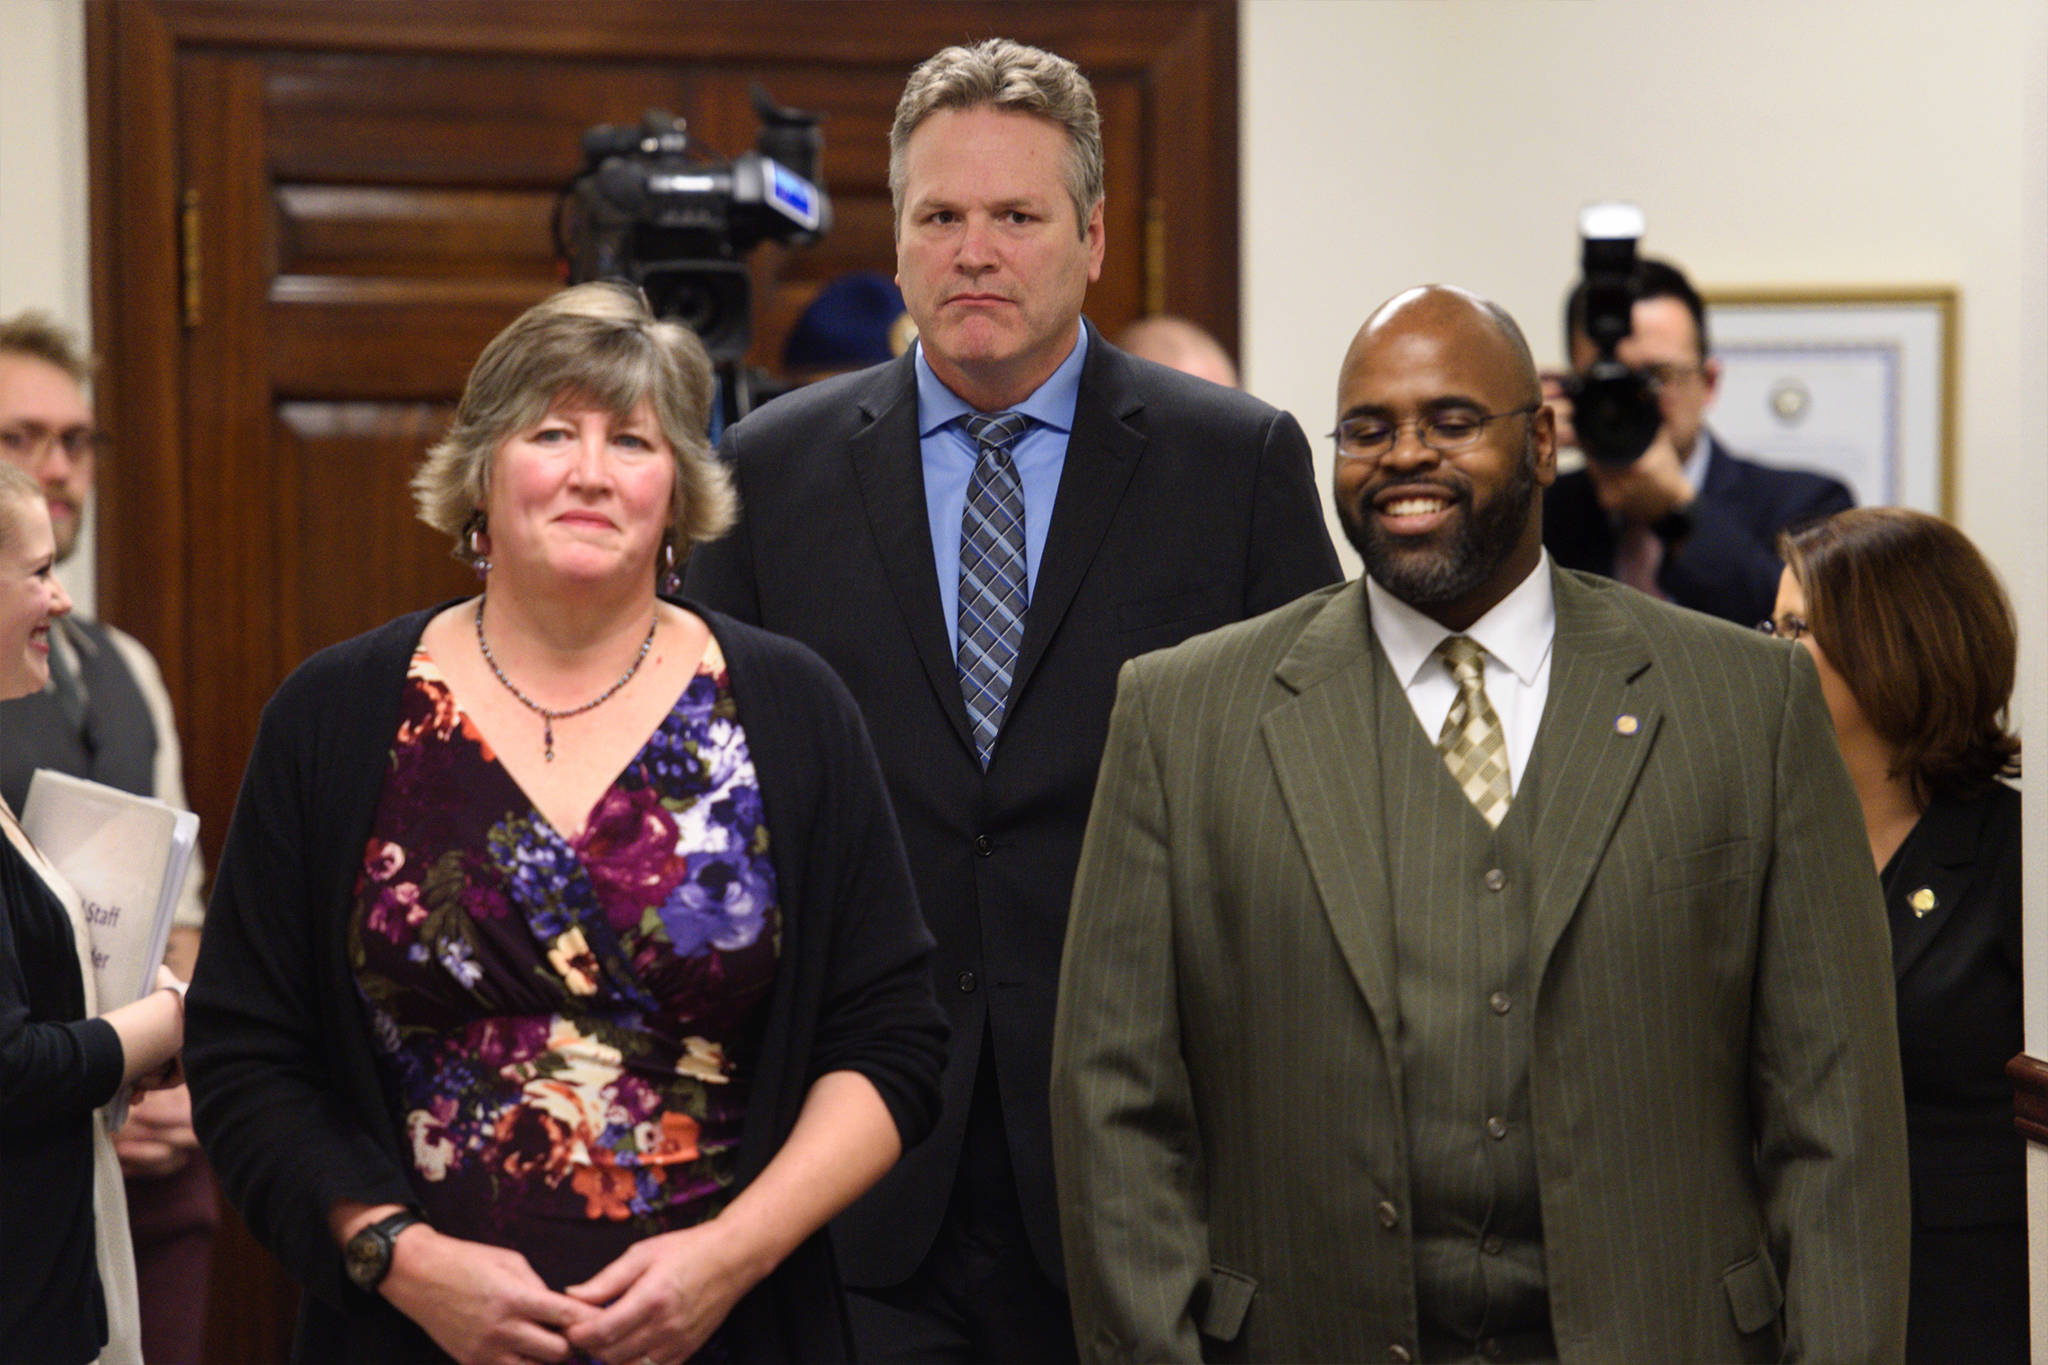 Gov. Mike Dunleavy walks into his State of the State speech in the House chamber at the Capitol in Juneau, Alaska, as Rep. Sara Hannan, D-Juneau, left, and Sen. David Wilson, R-Wasilla, walk into a Joint Session of the Alaska Legislature on Tuesday, Jan. 22, 2019. (Michael Penn | Juneau Empire)